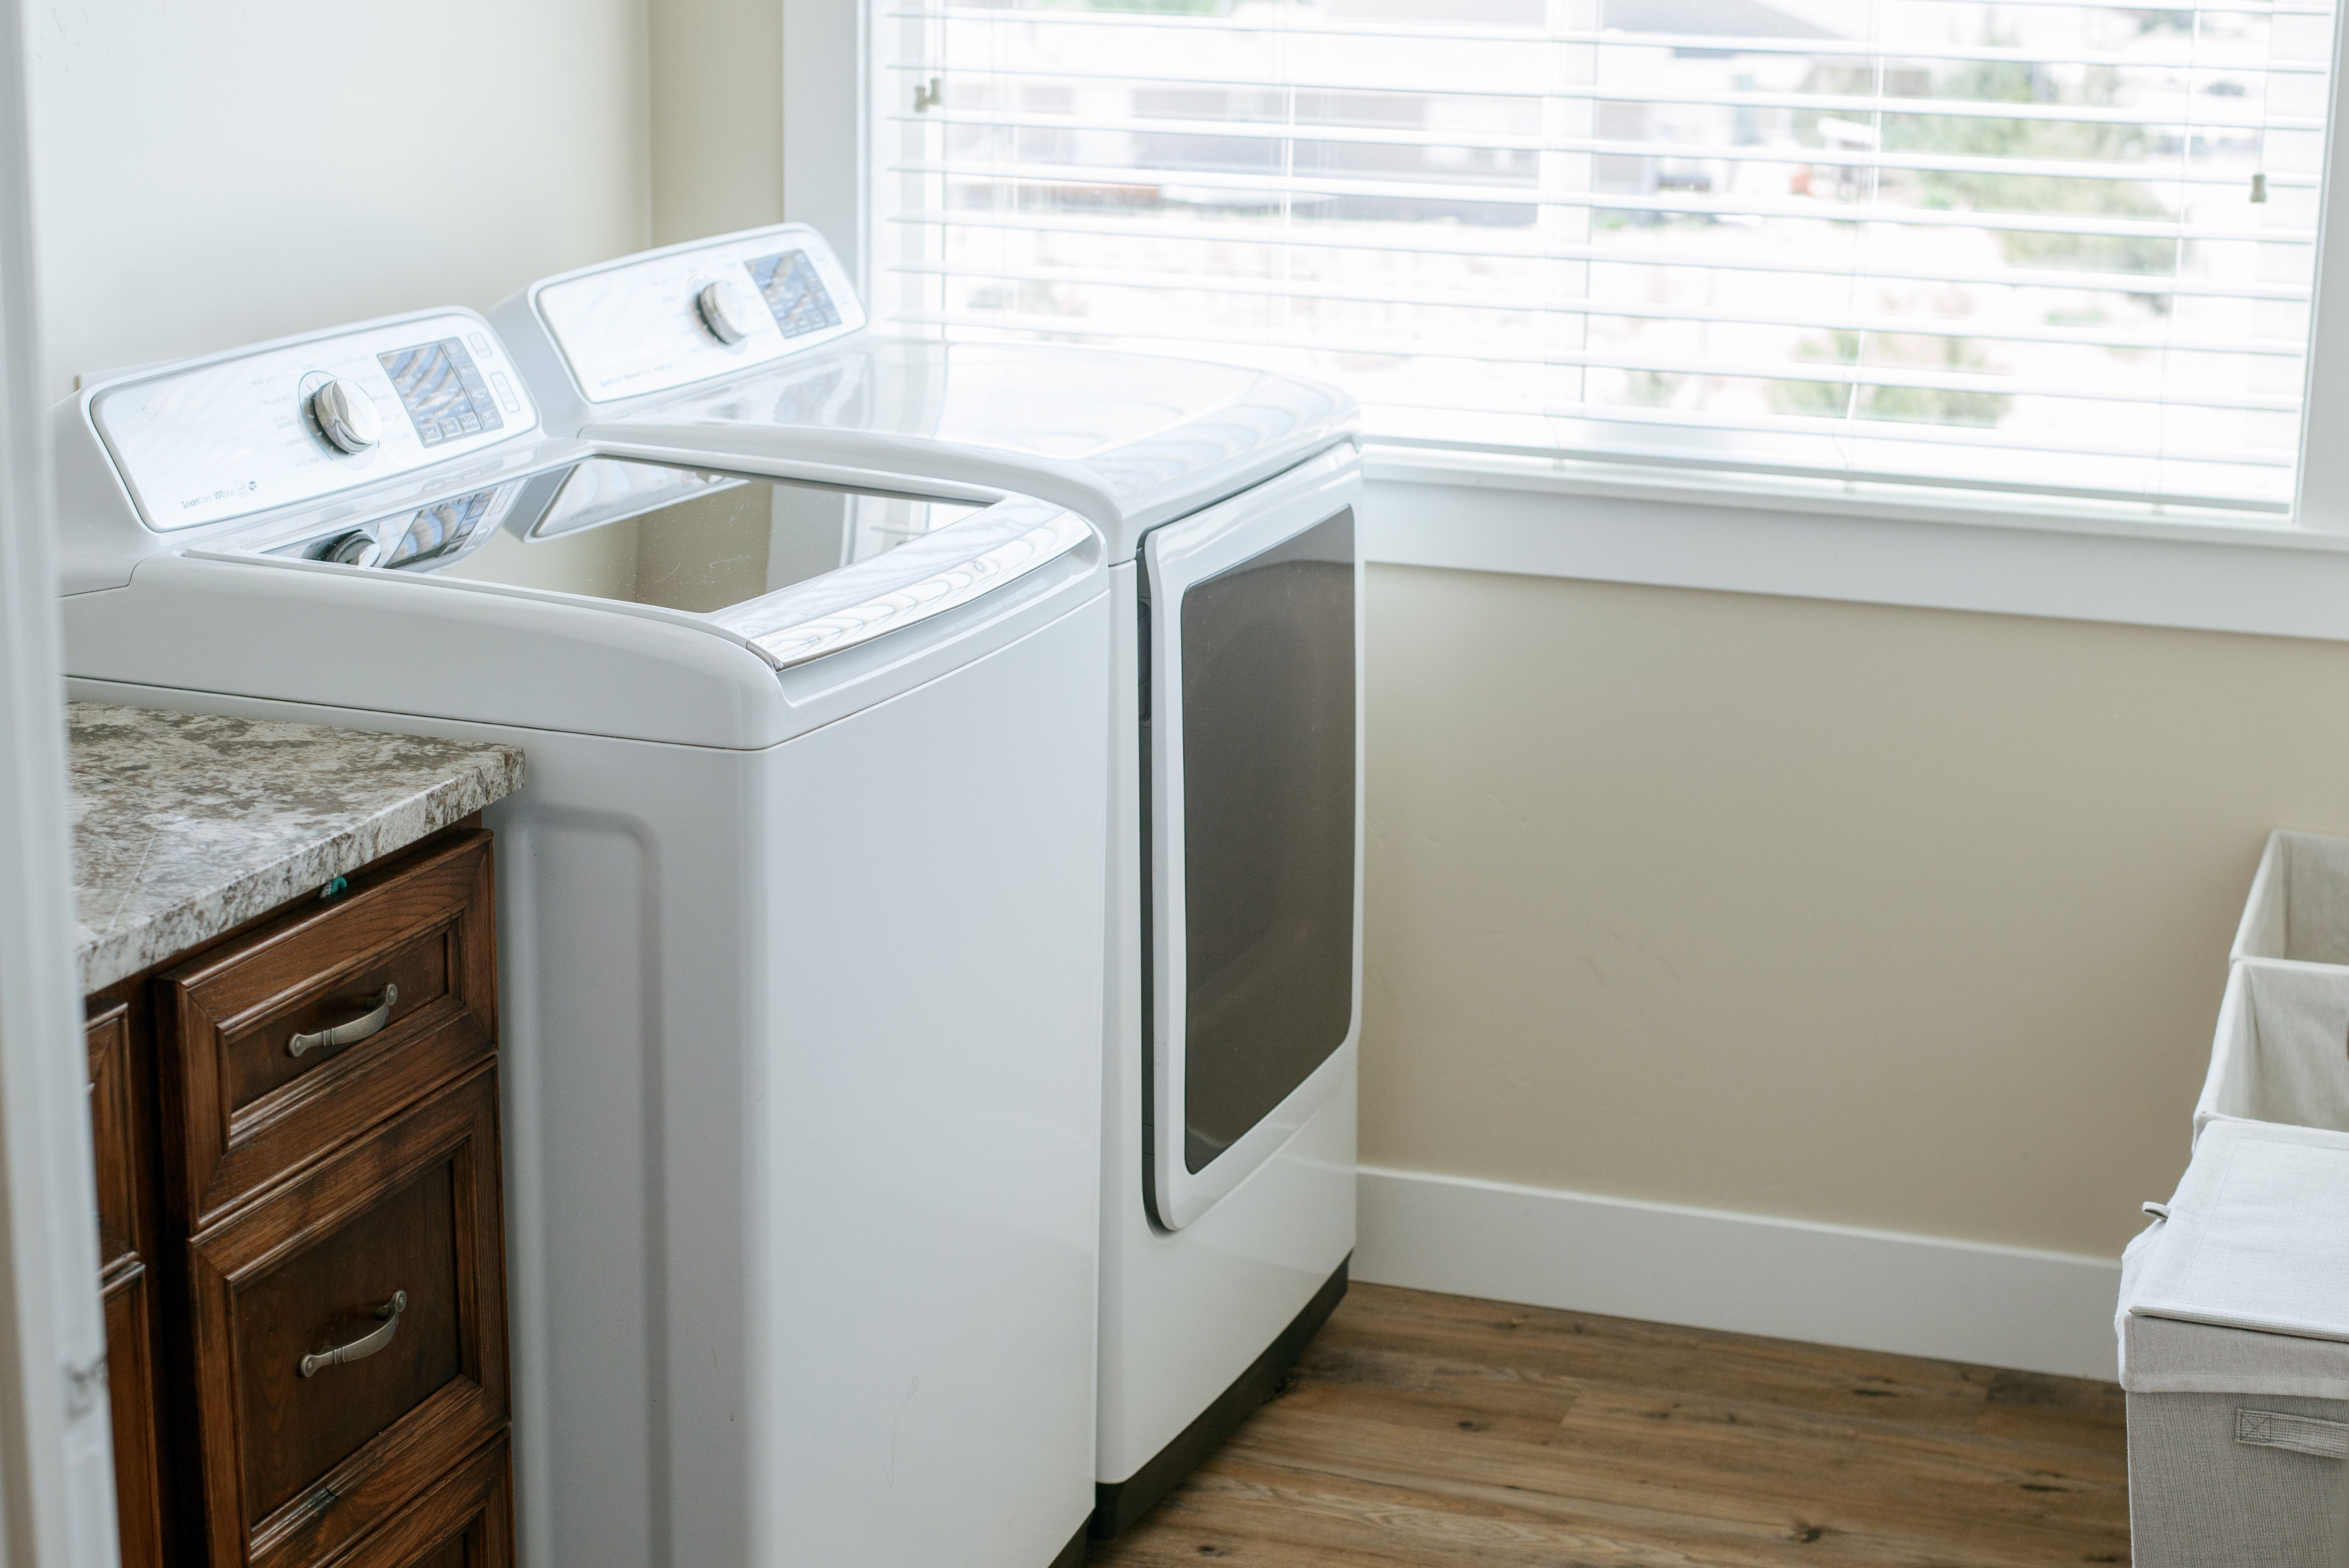 We ve Been Using Our Dryer All Wrong—Heres How